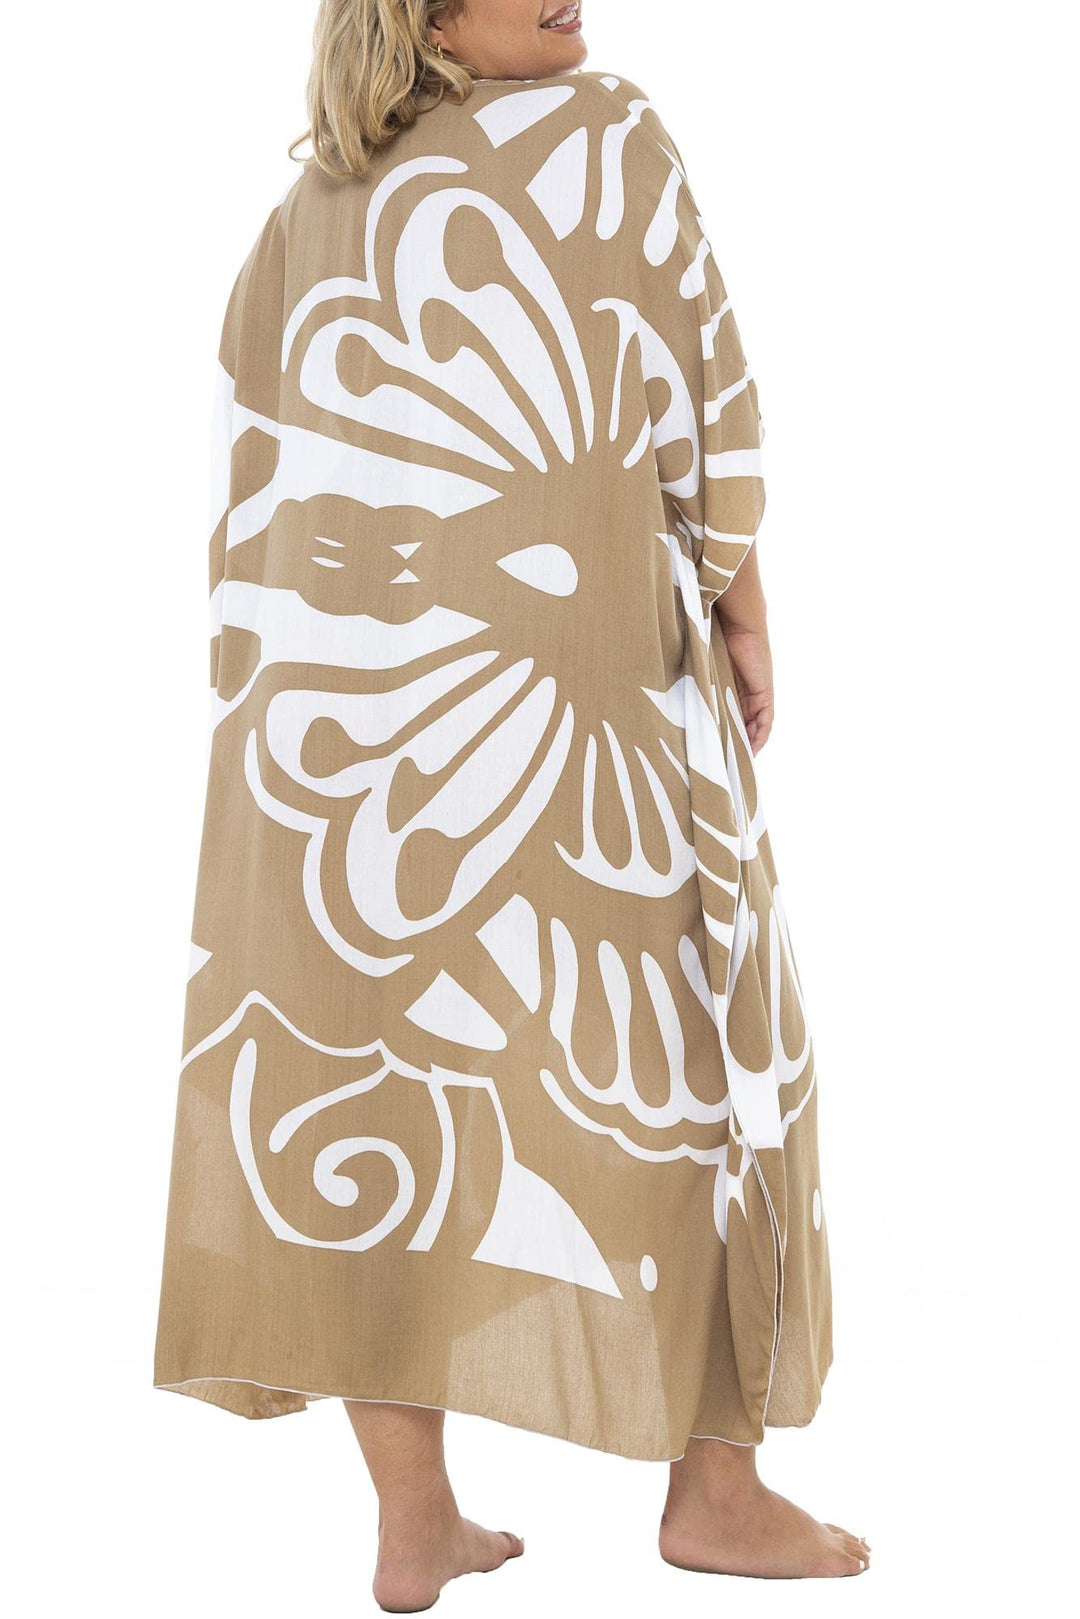 Plus Size Maxi Loose Tunic Cover Up Dress